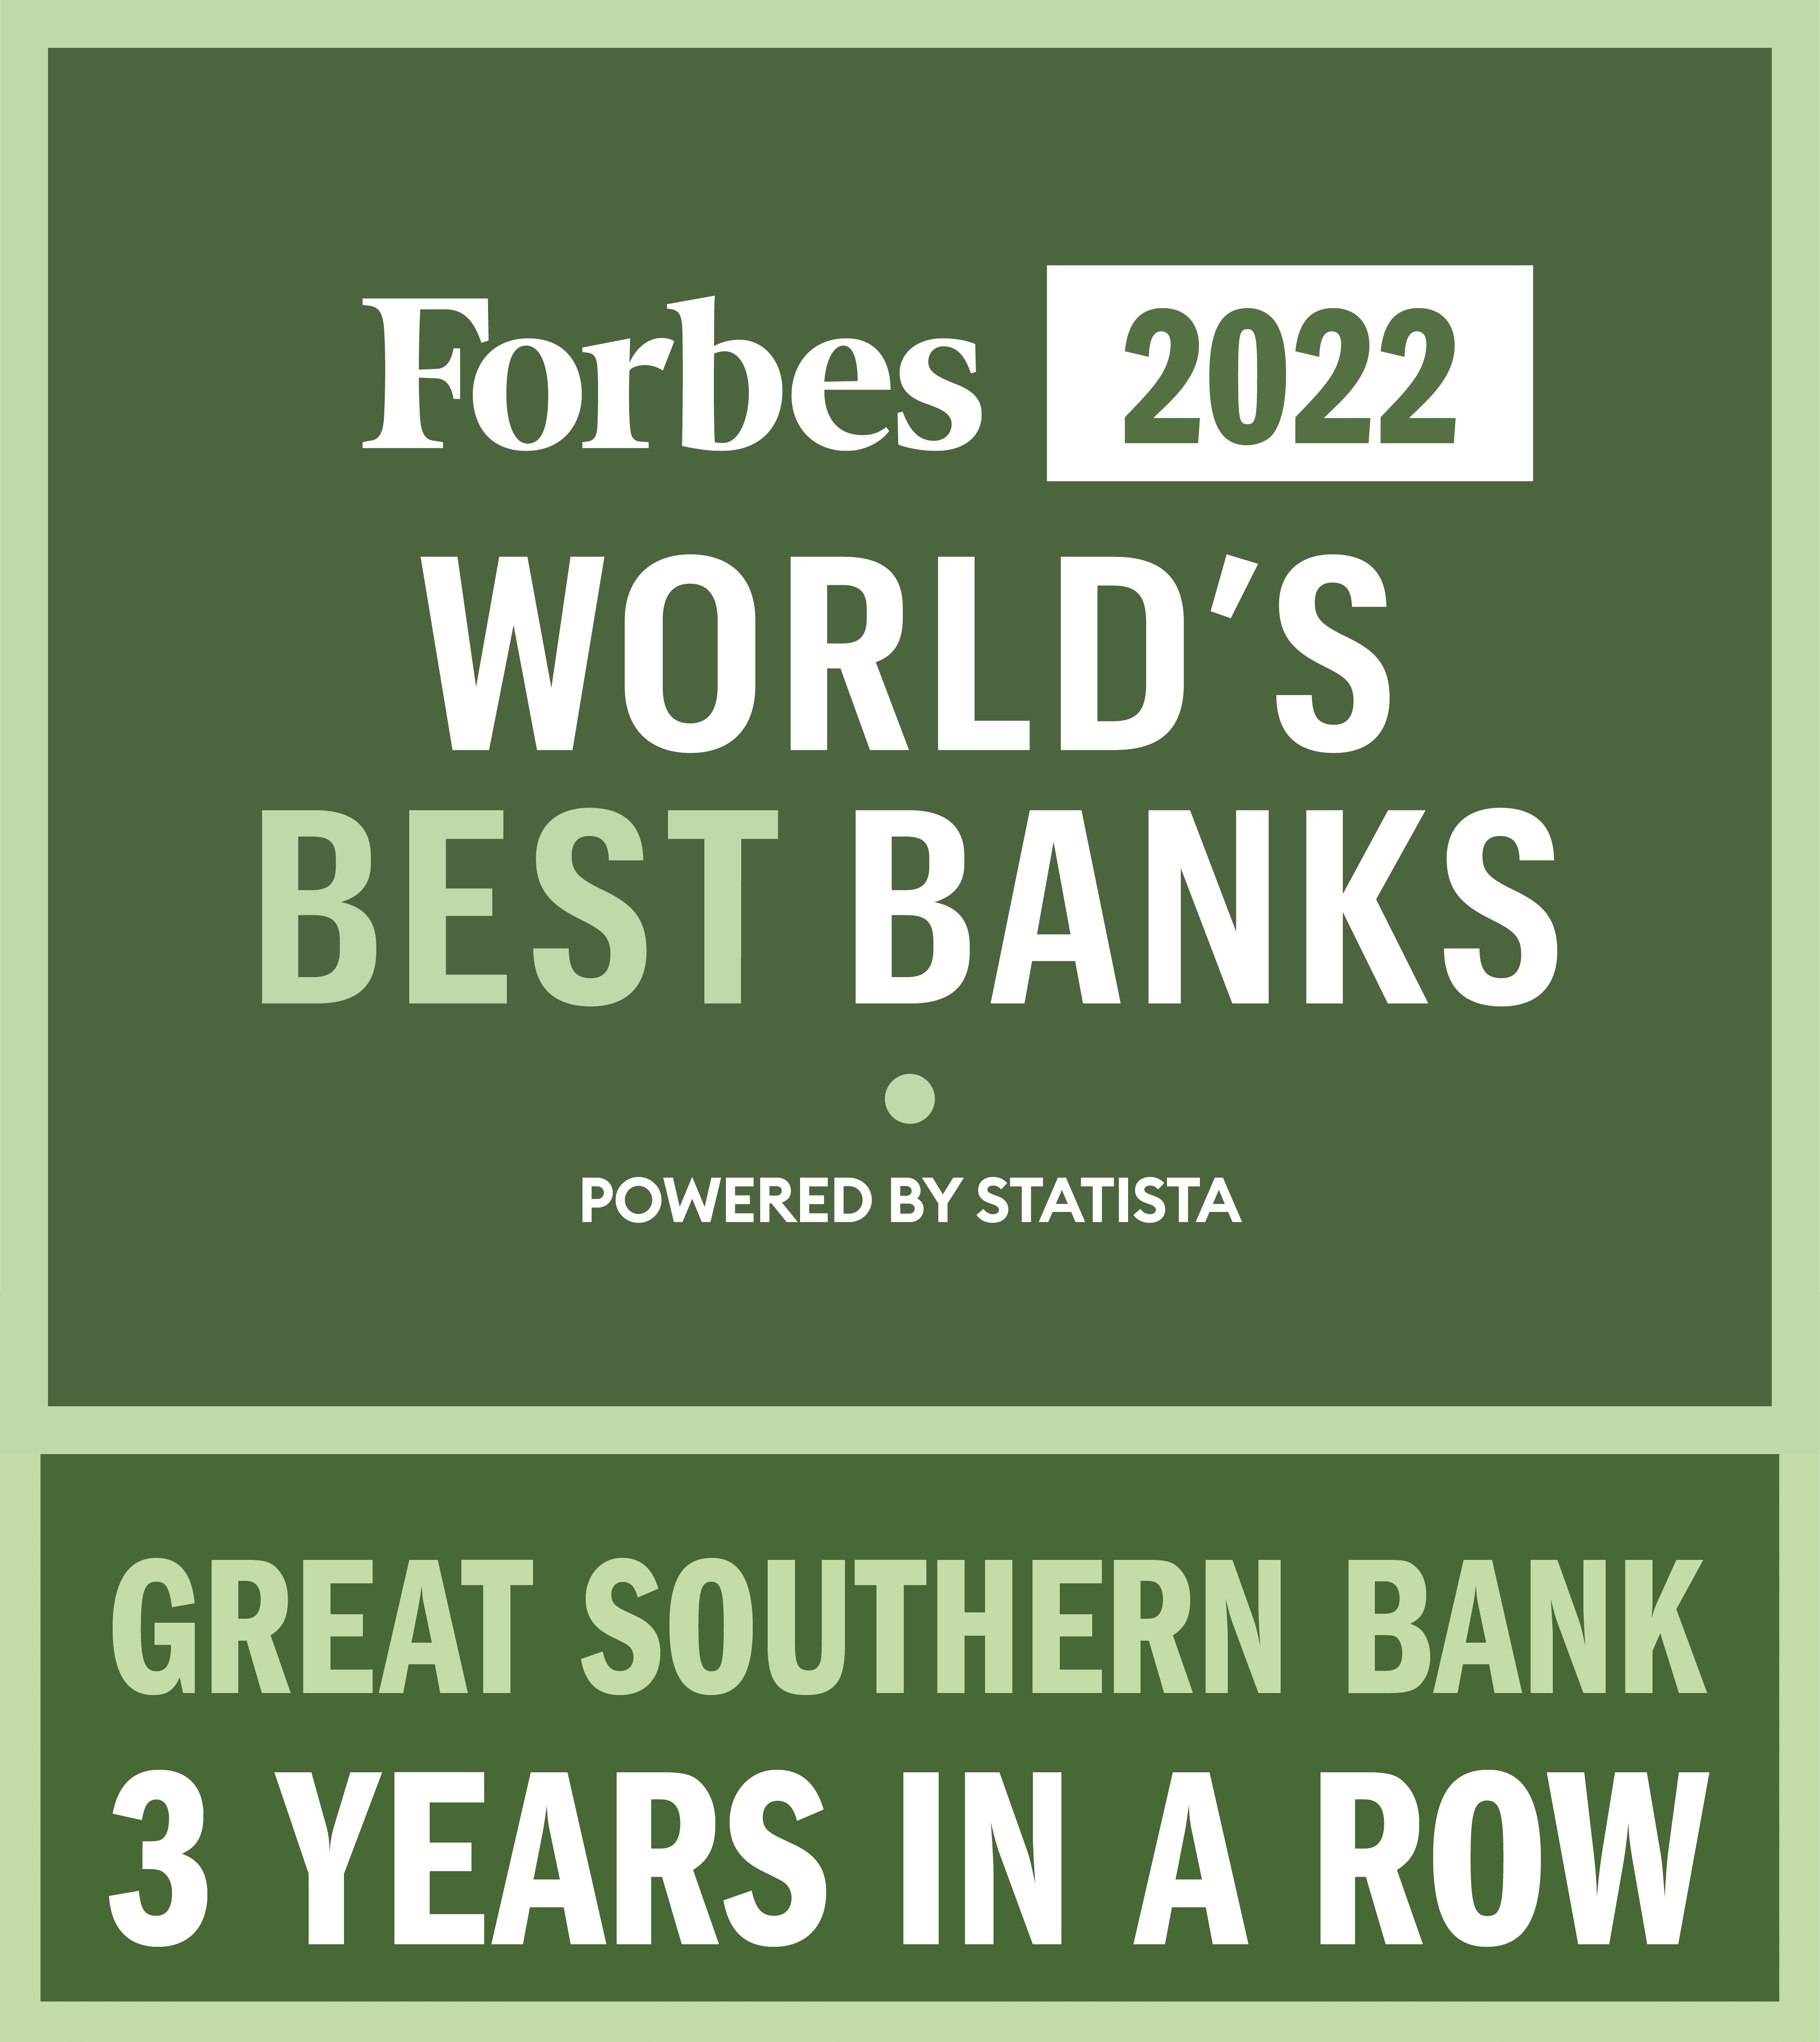 Forbes 2022 World's Best Banks. Great Southern Bank 3 Years in a Row.